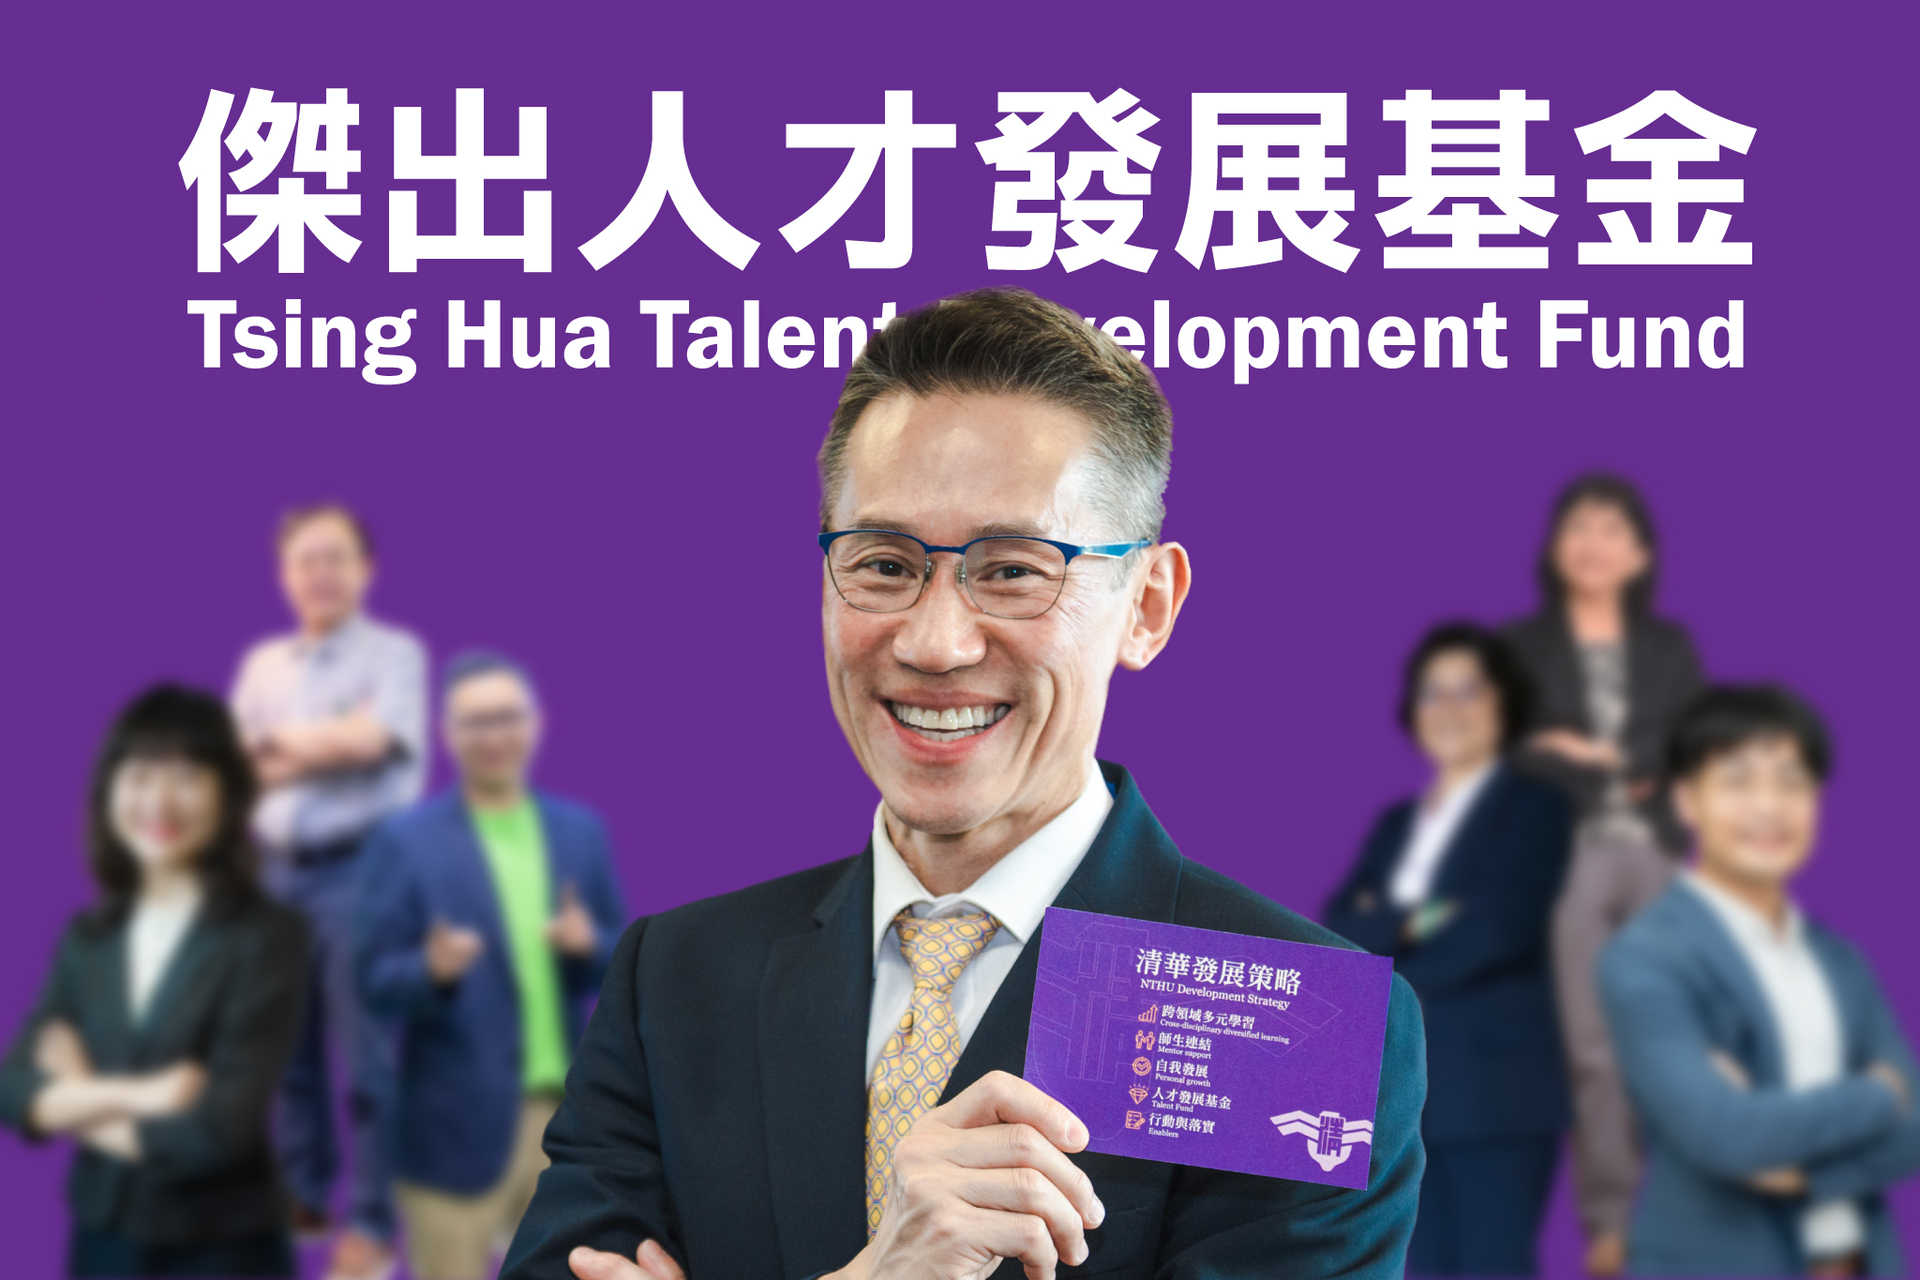 NTHU launched the Tsing Hua Talent Development Fund to attract and retain exceptional faculty members. The fund aims to provide merit-based supplements up to 600%, 640%, and 430% of the base salary for assistant, associate, and full professors starting next month.